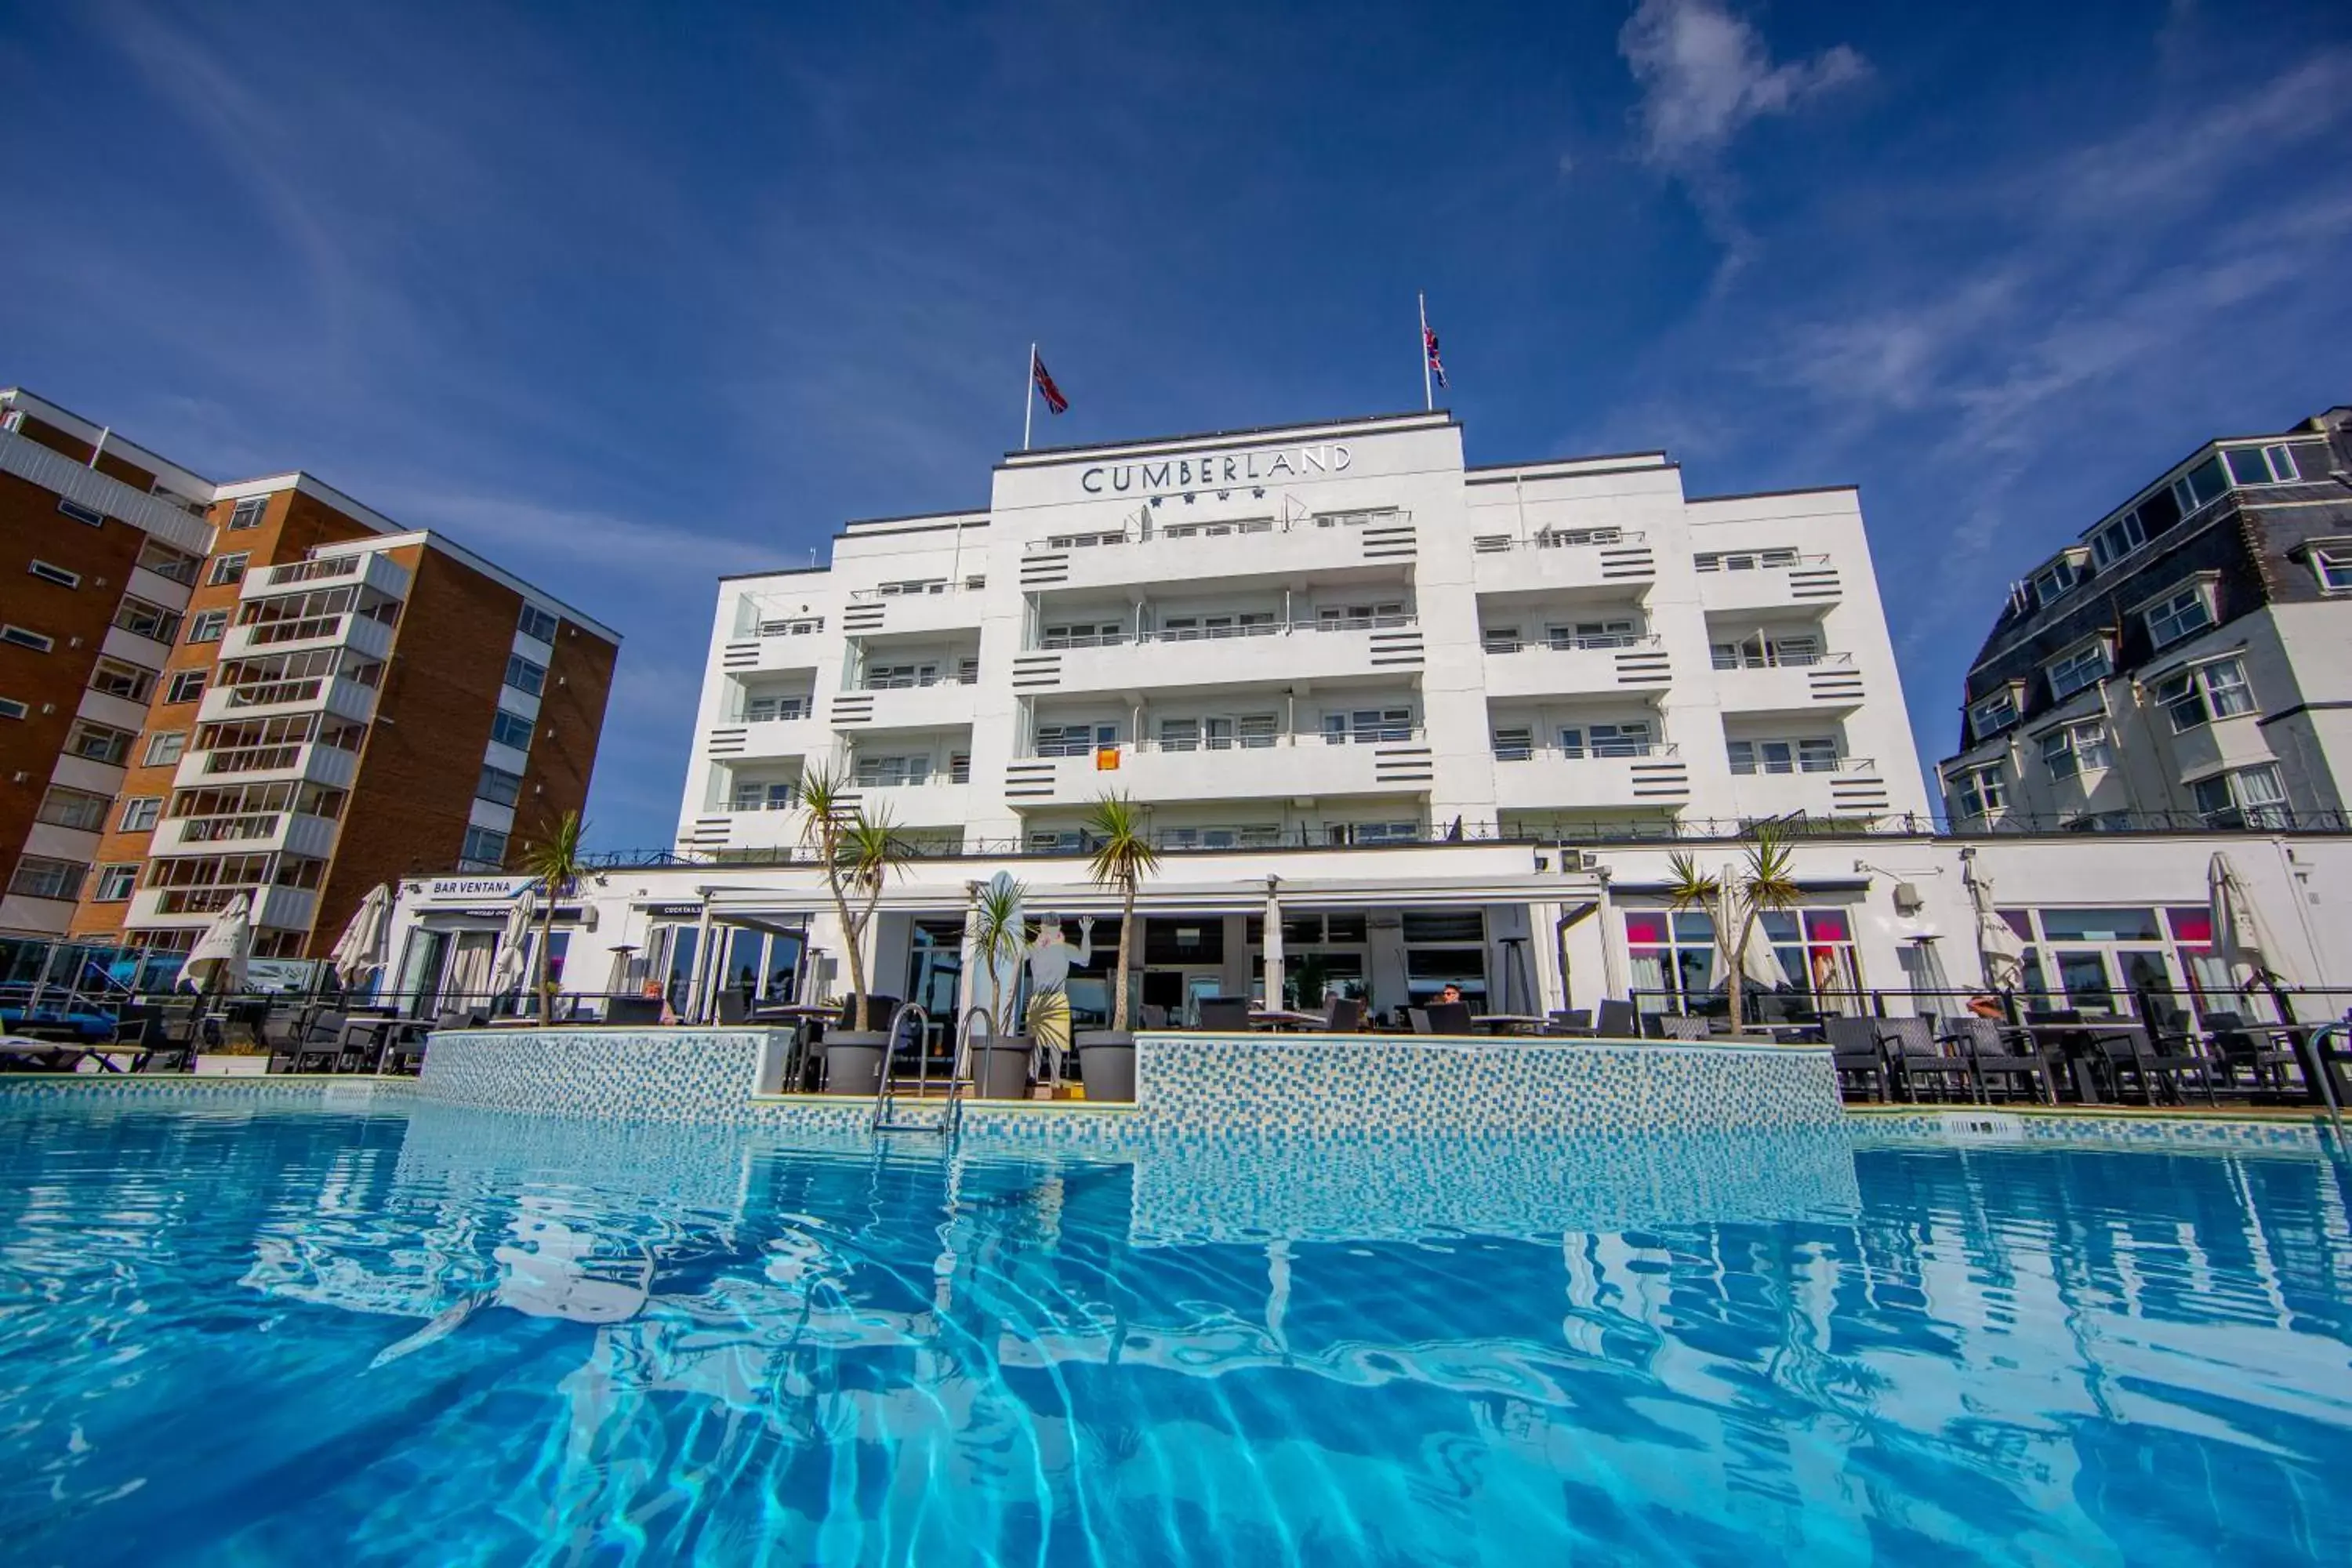 Property building, Swimming Pool in Cumberland Hotel - OCEANA COLLECTION